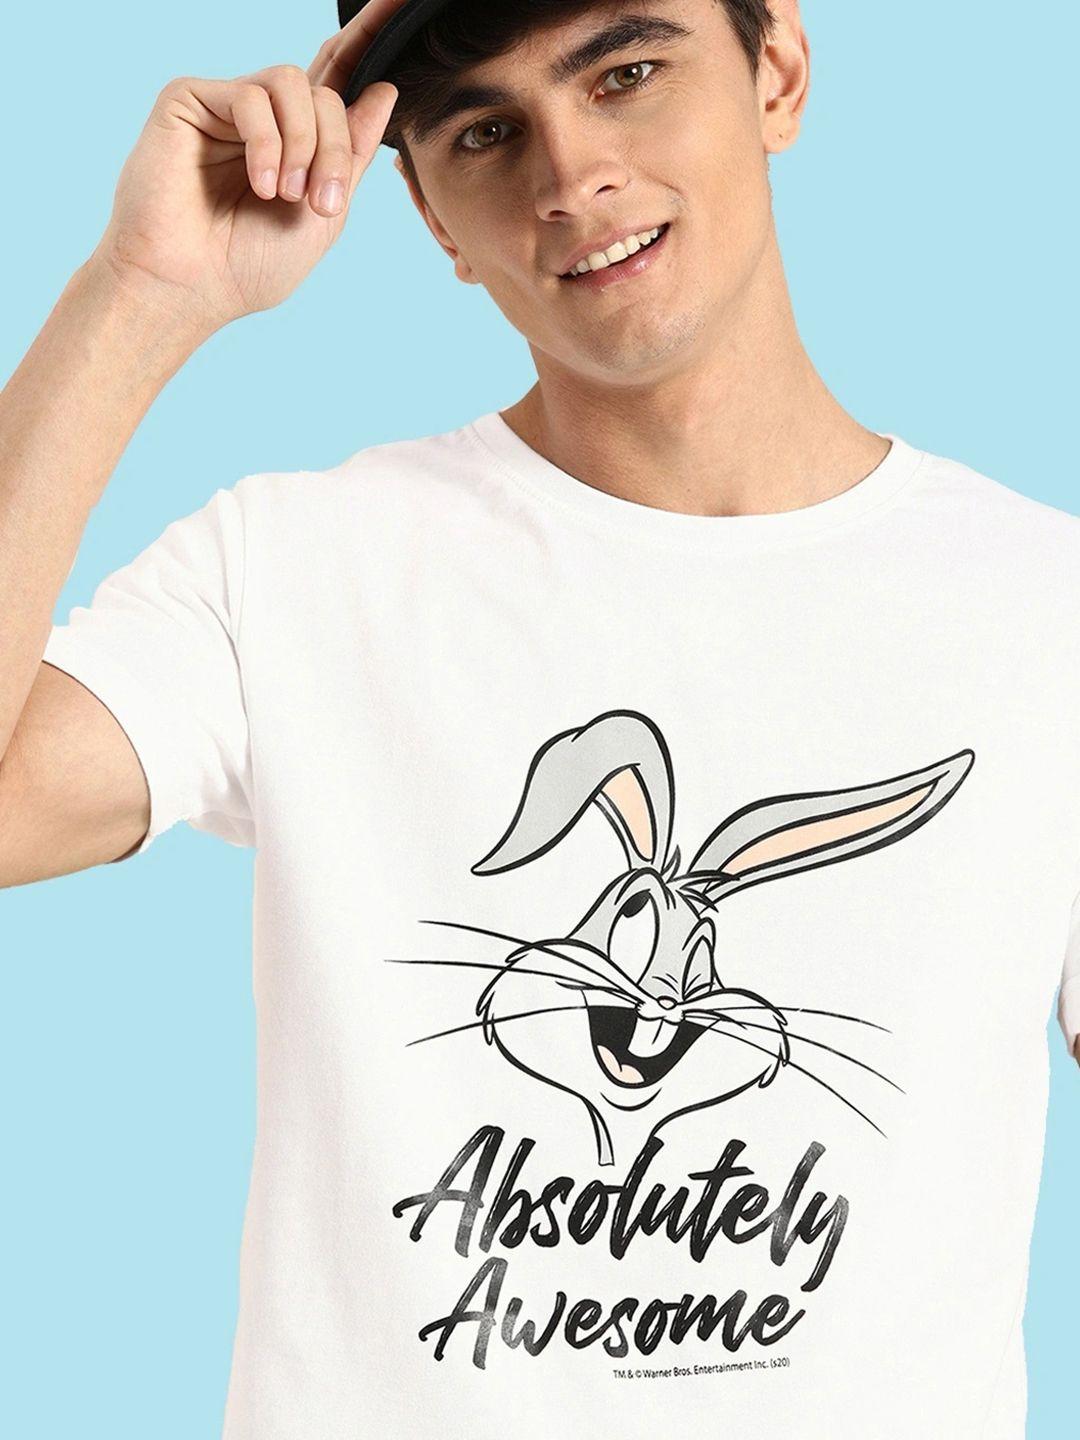 bewakoof official looney tunes merchandise absolutely awesome graphic printed t-shirt